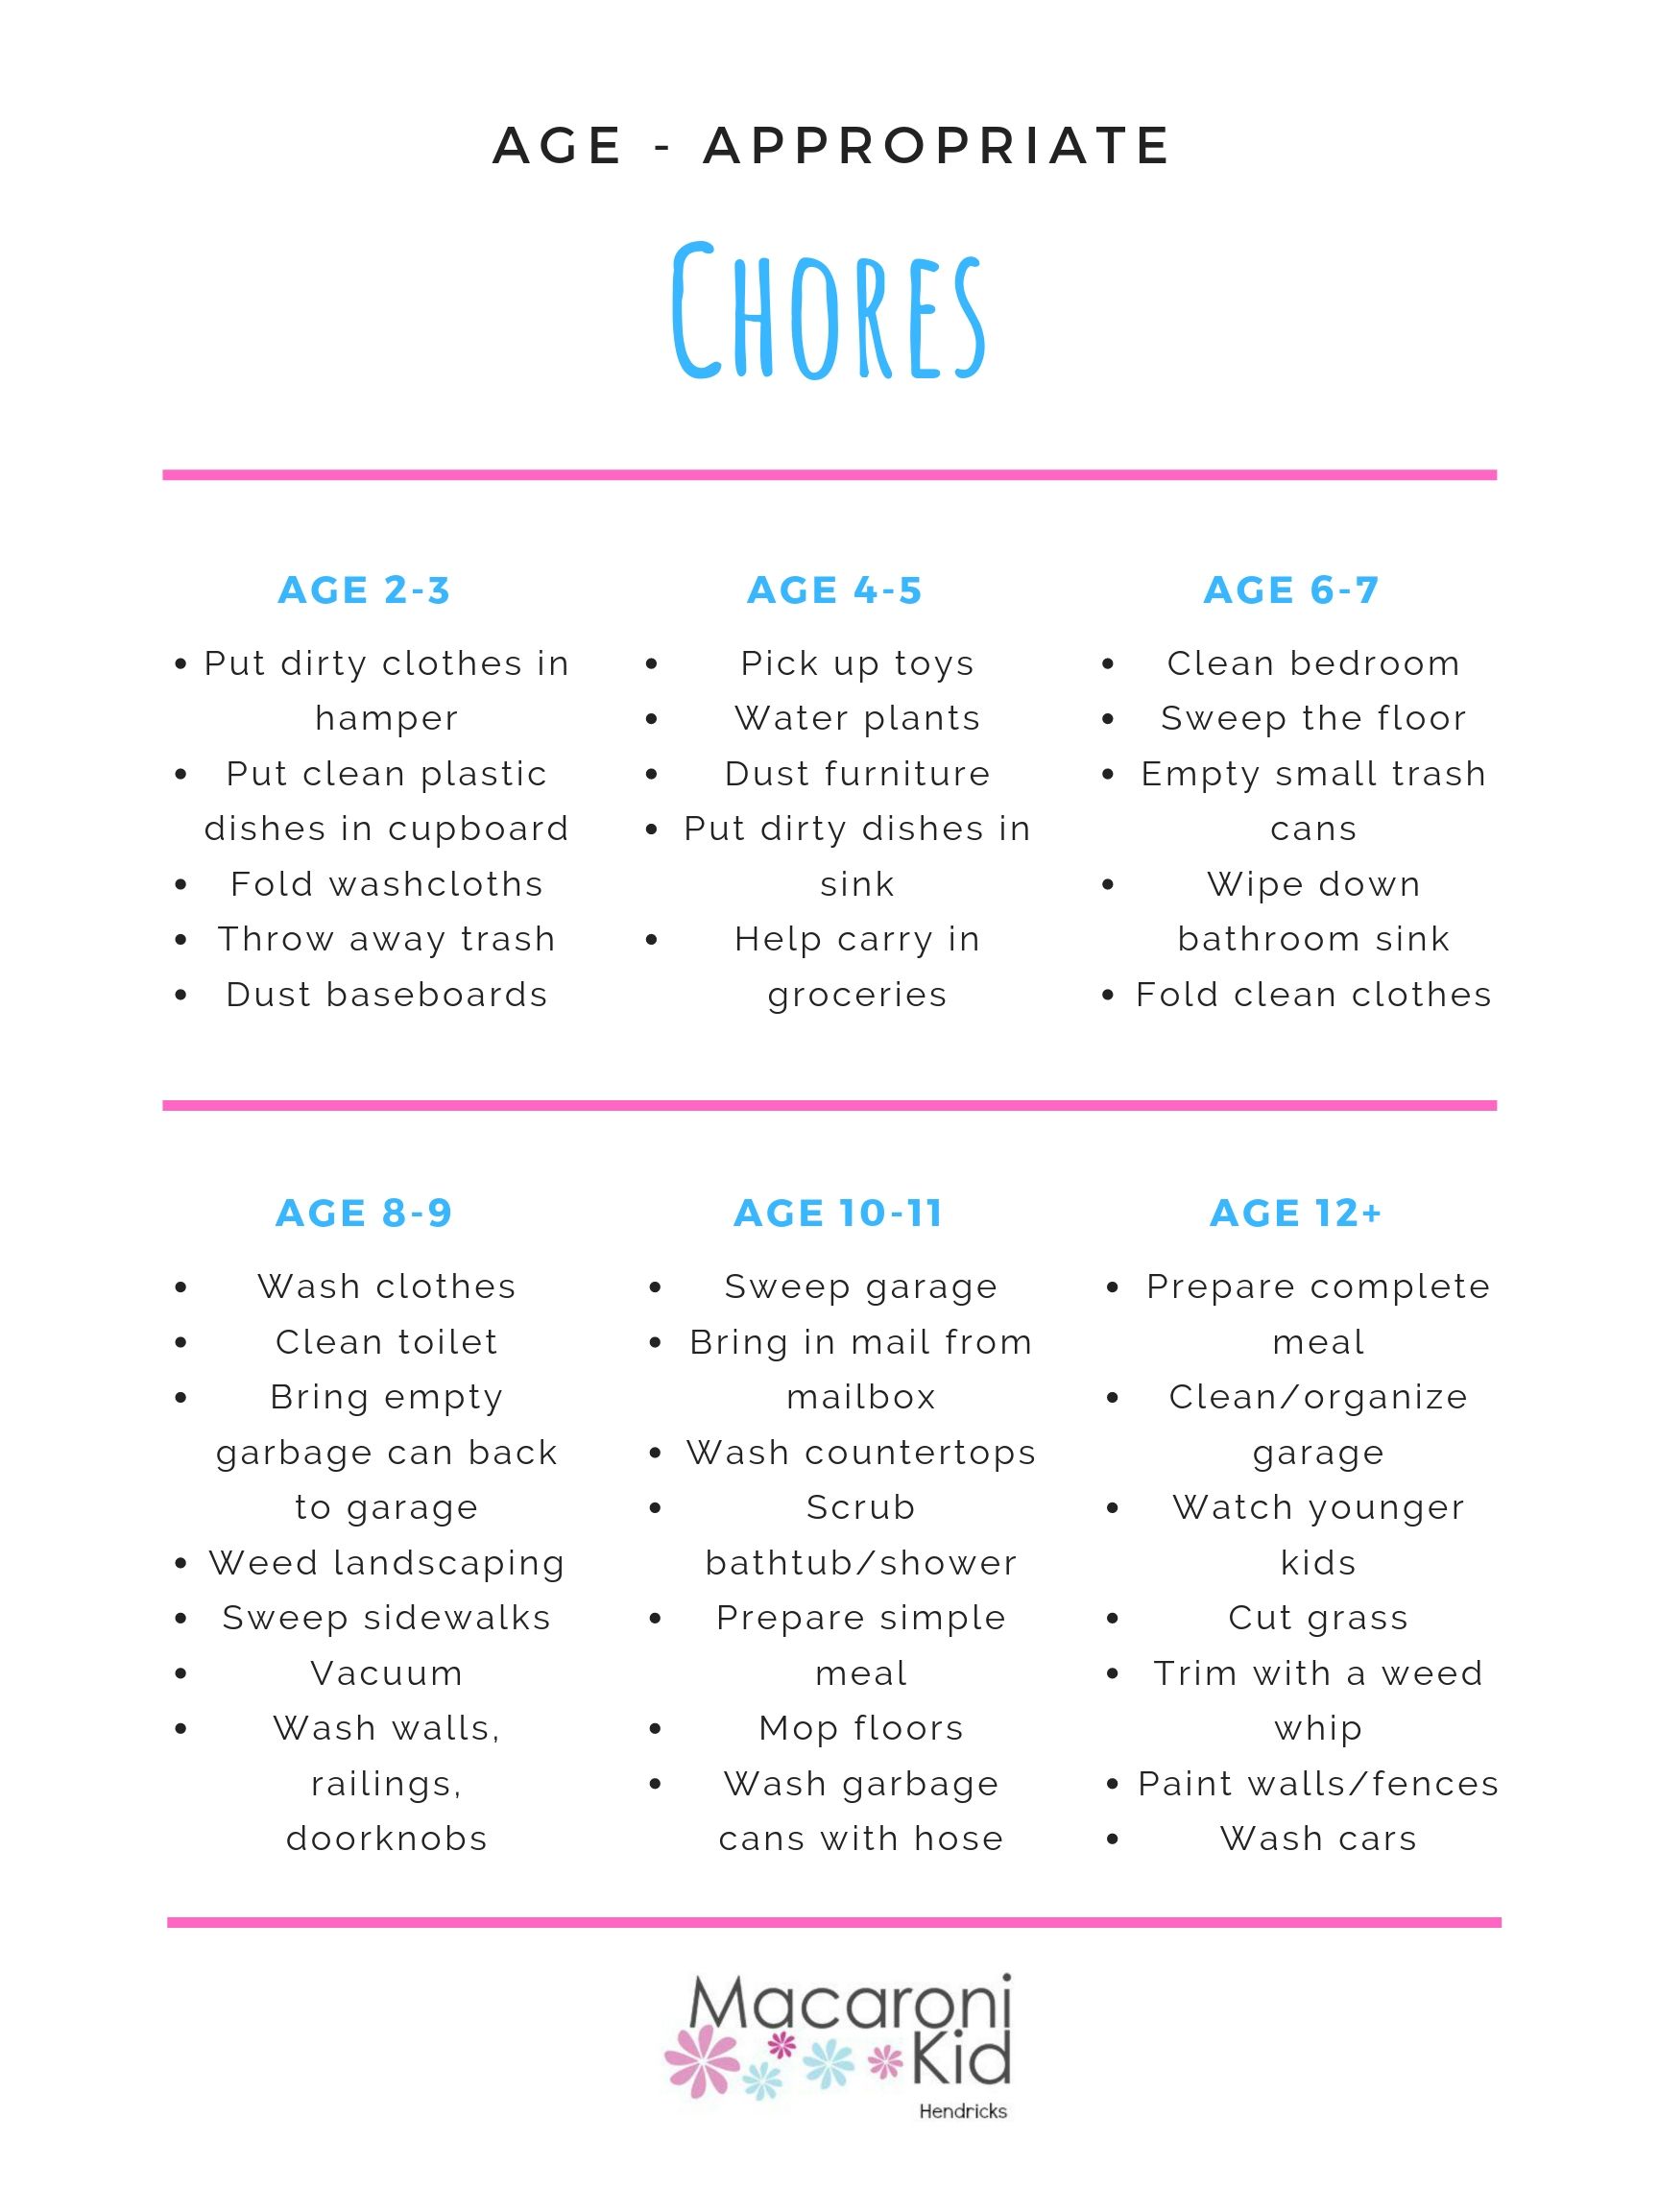 AGE APPROPRIATE CHORE CHARTS